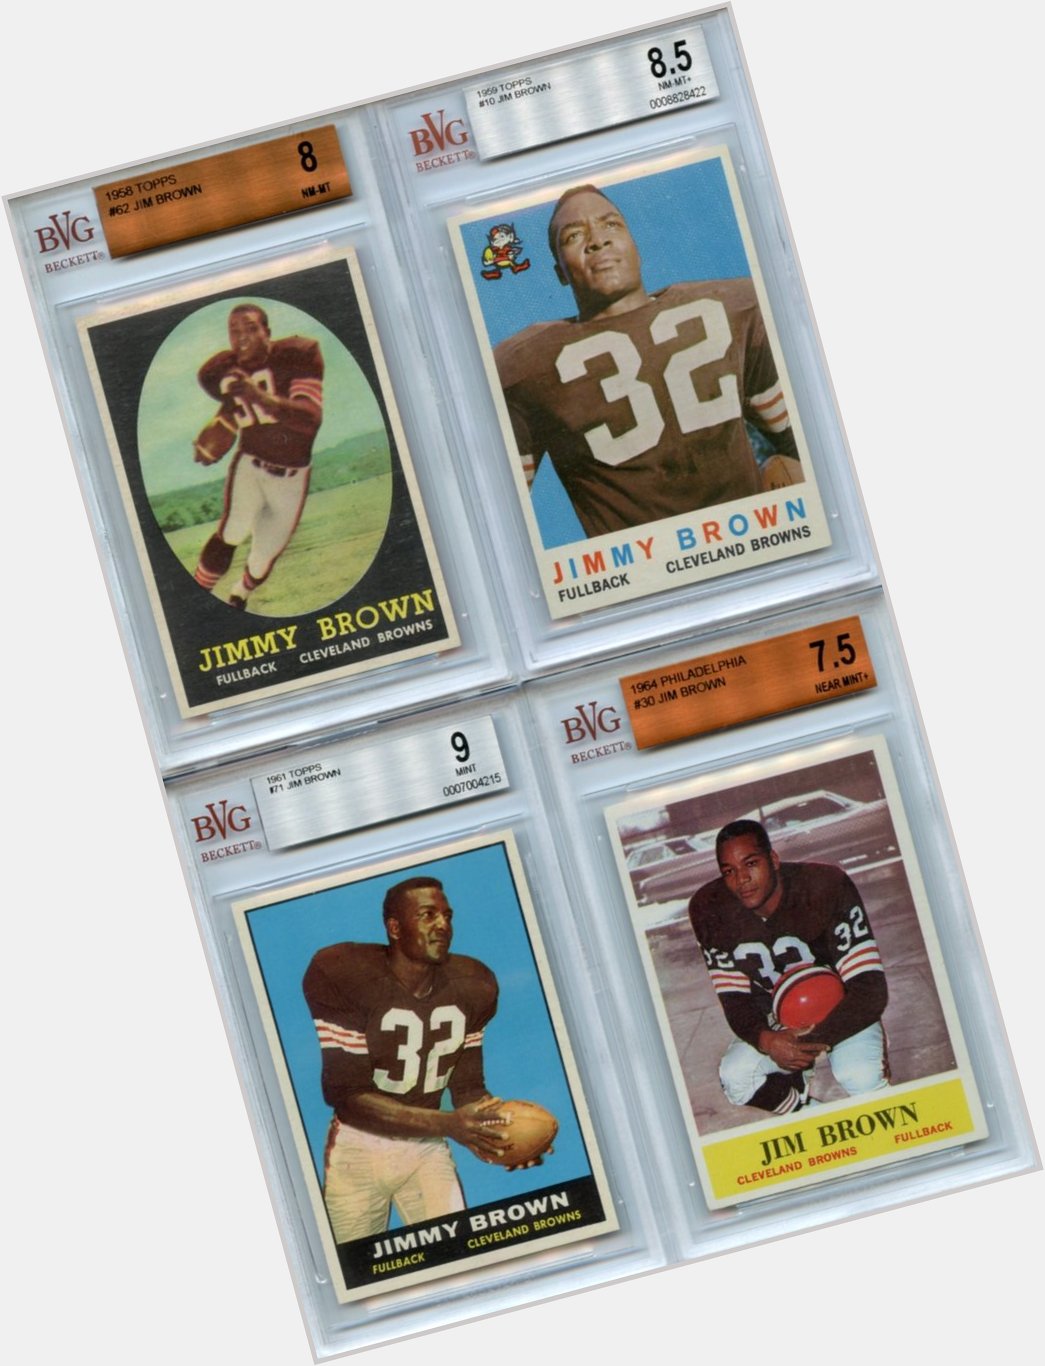 RB turns 82 today ! Happy Birthday Jim Brown. 